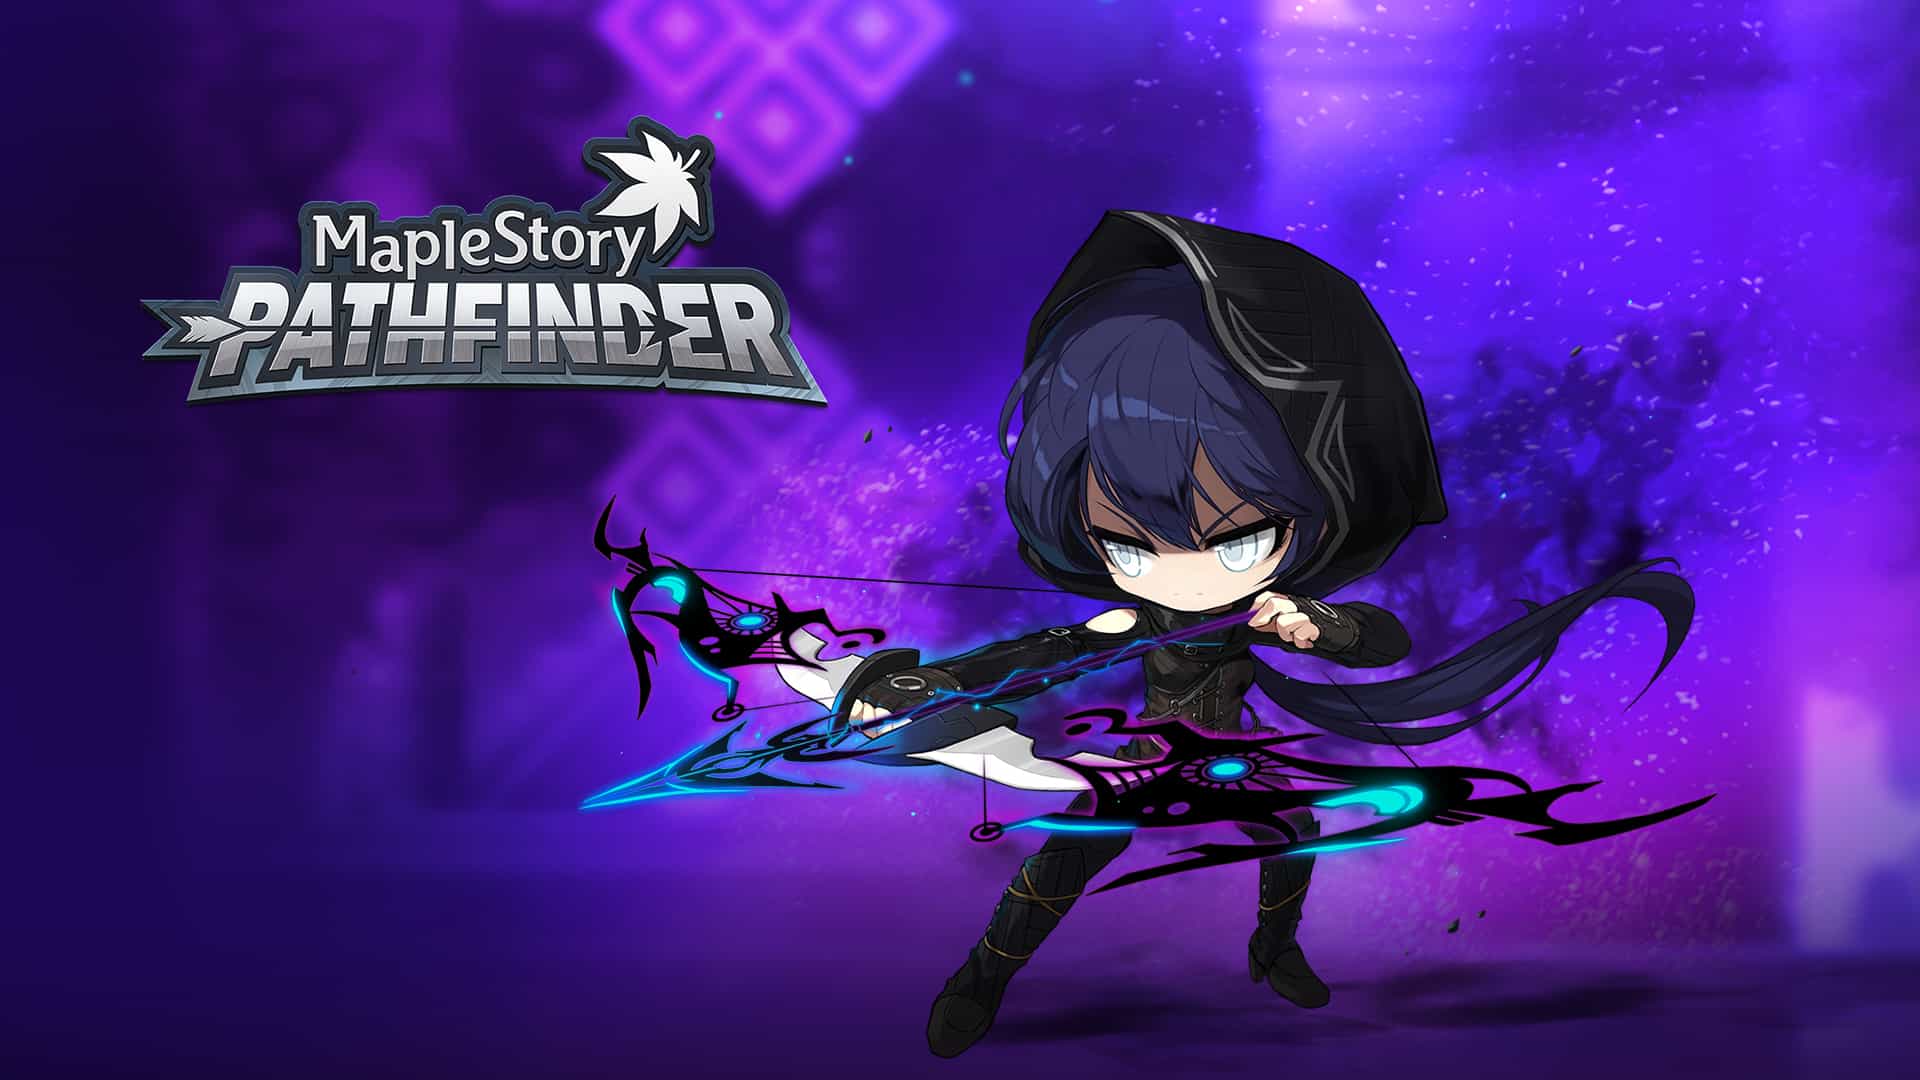 New Pathfinder Class Headlines MapleStory Update After Defeat of the Black Mage